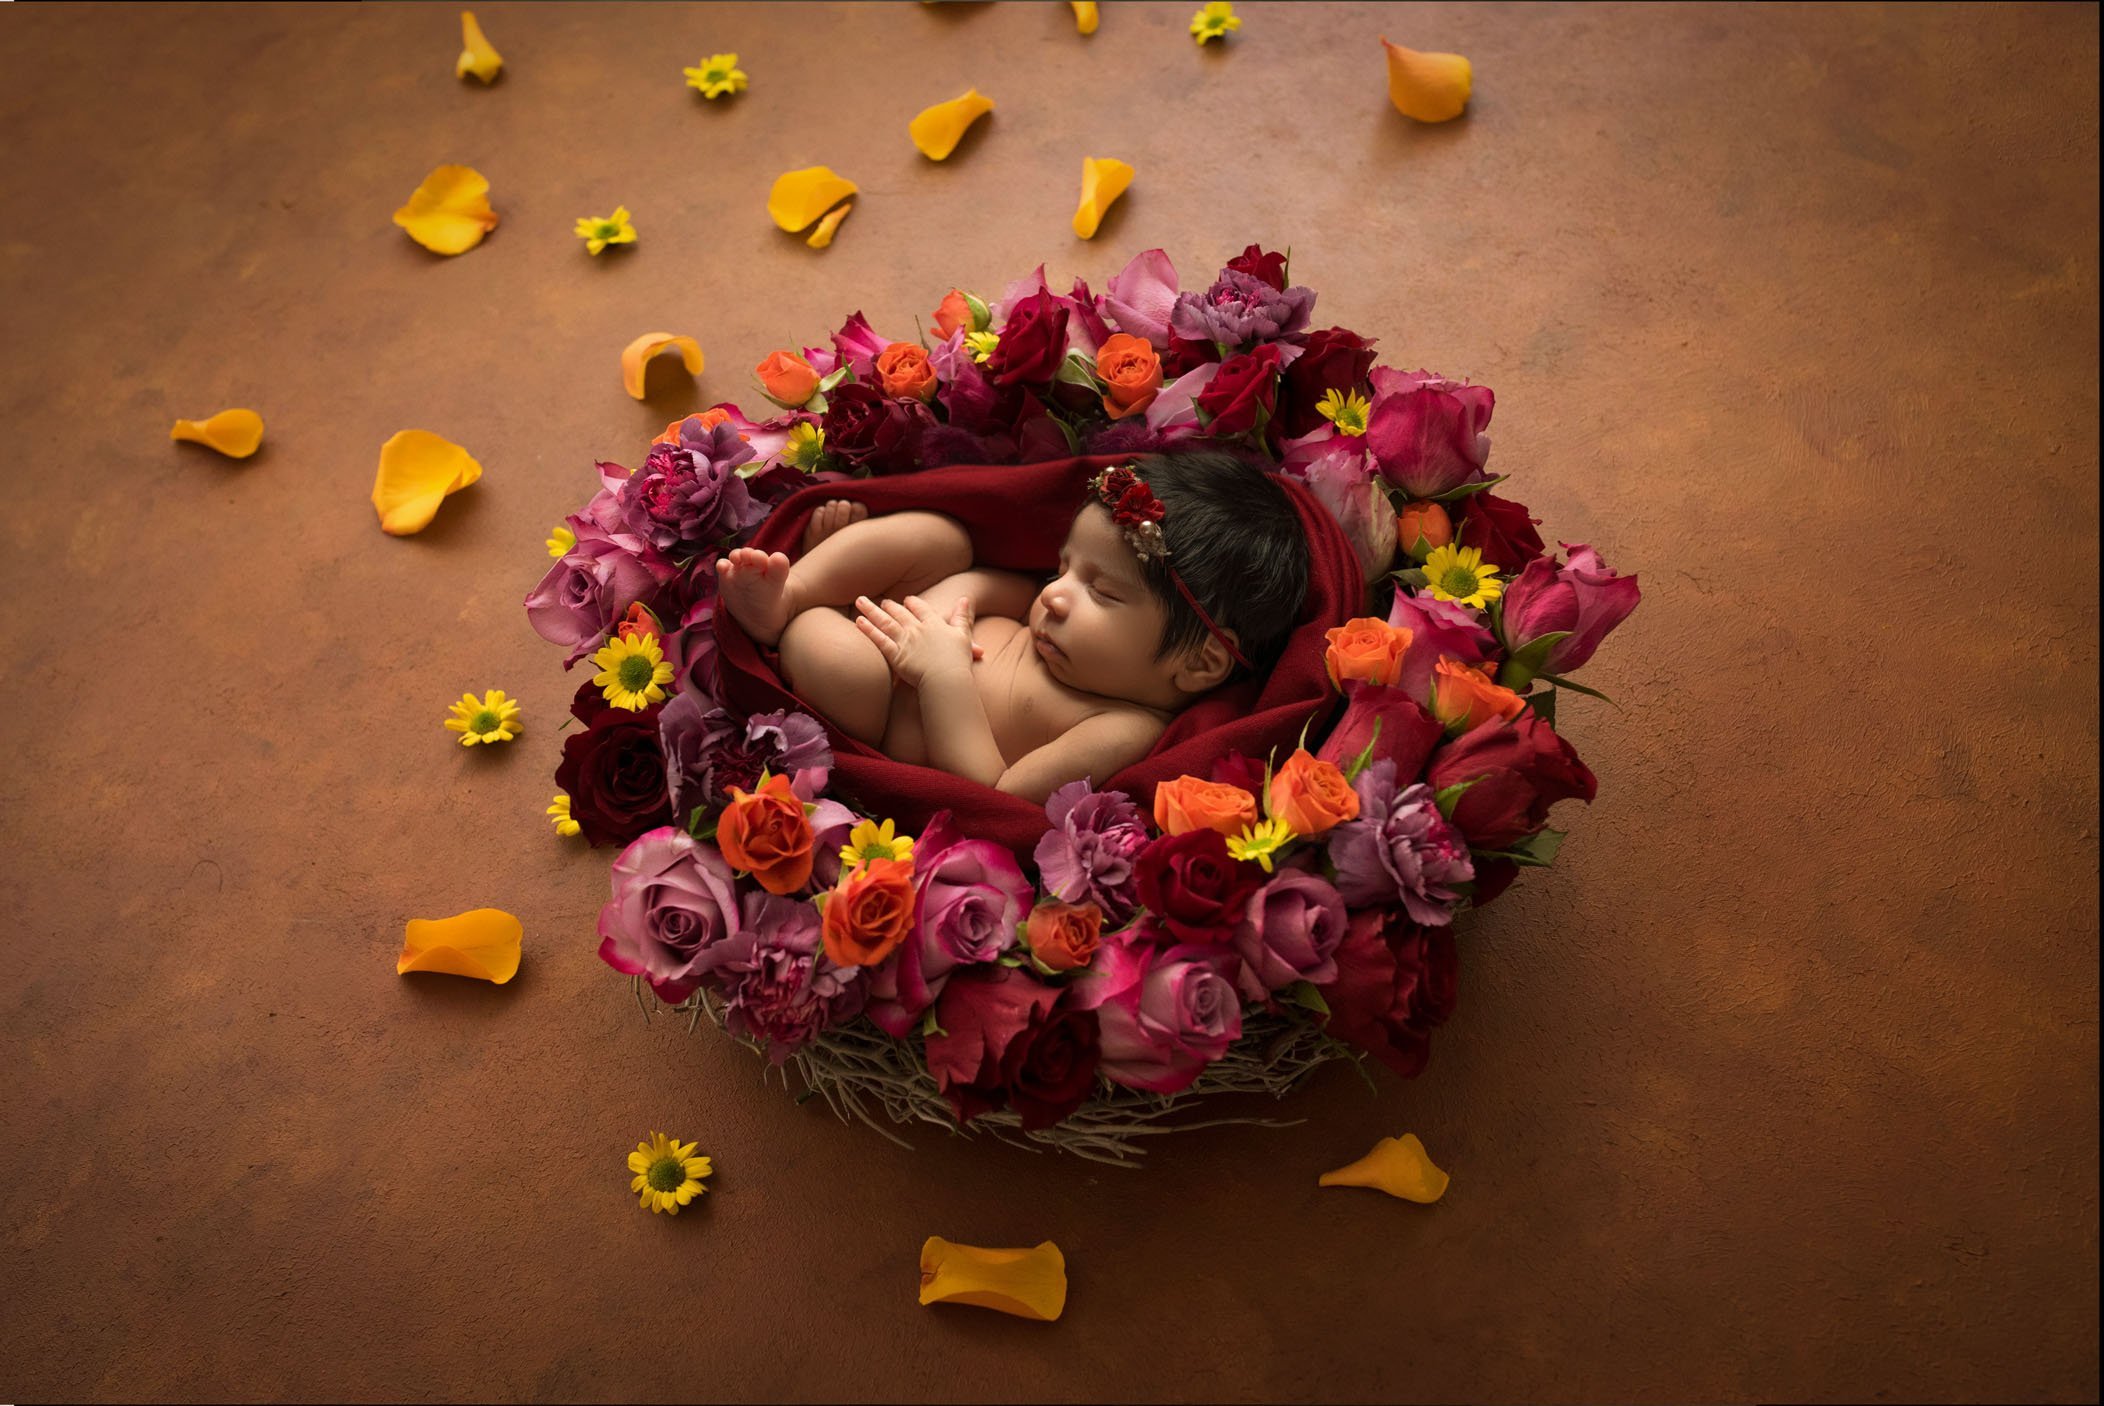 newborn baby girl sleeping in next of pink, red and orange roses